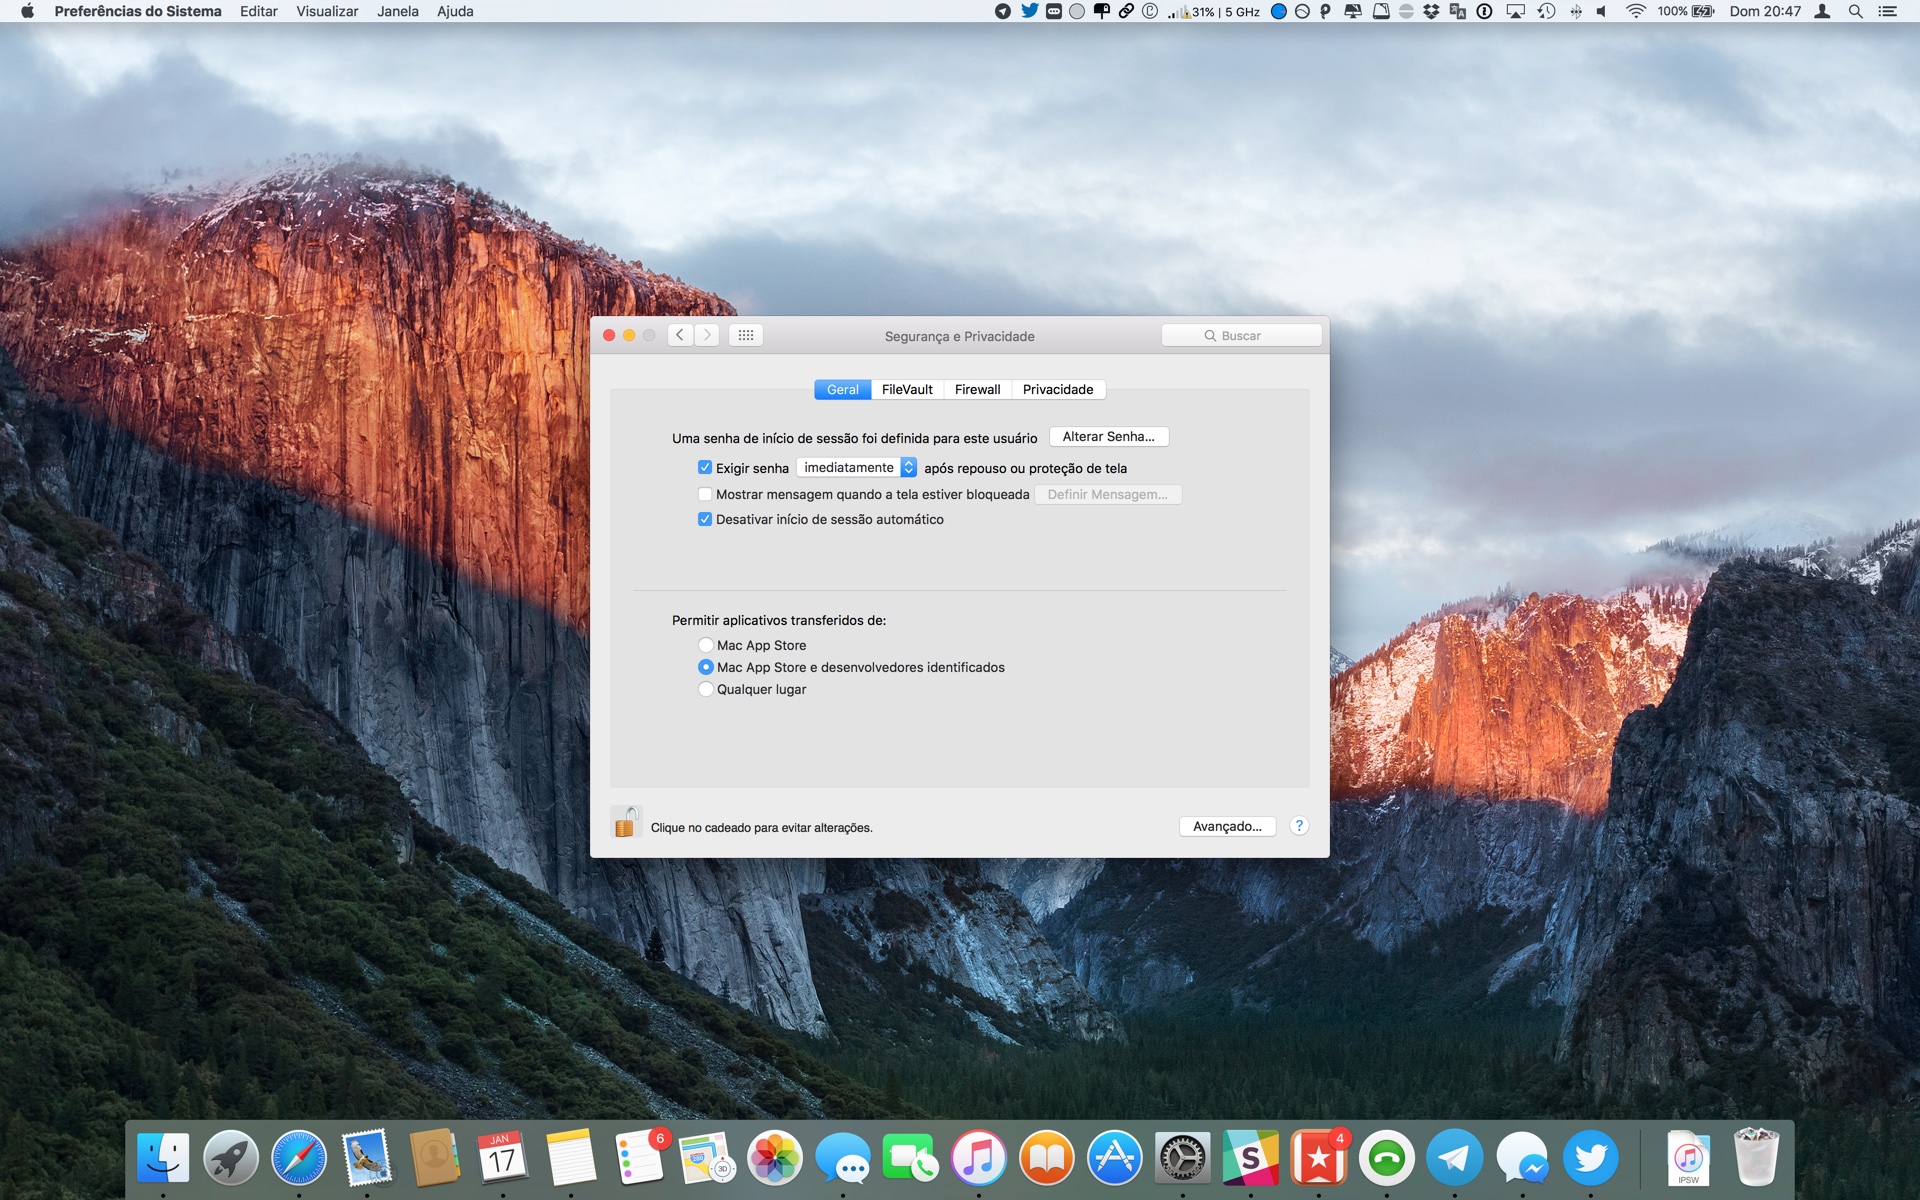 Researcher says Apple needs to fix more security flaws in OS X Gatekeeper